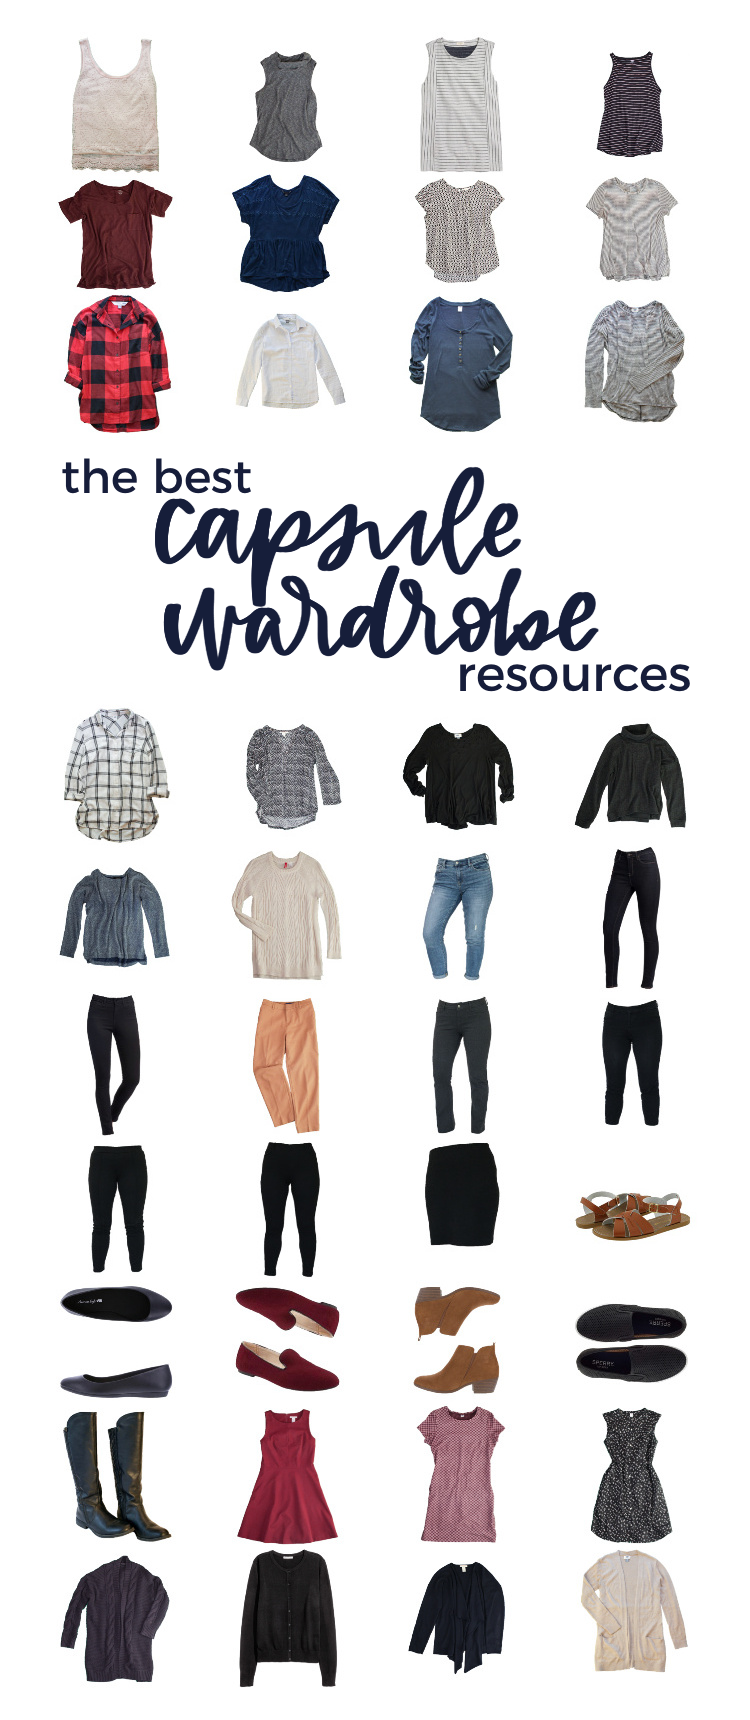 The Best Capsule Wardrobe Resources